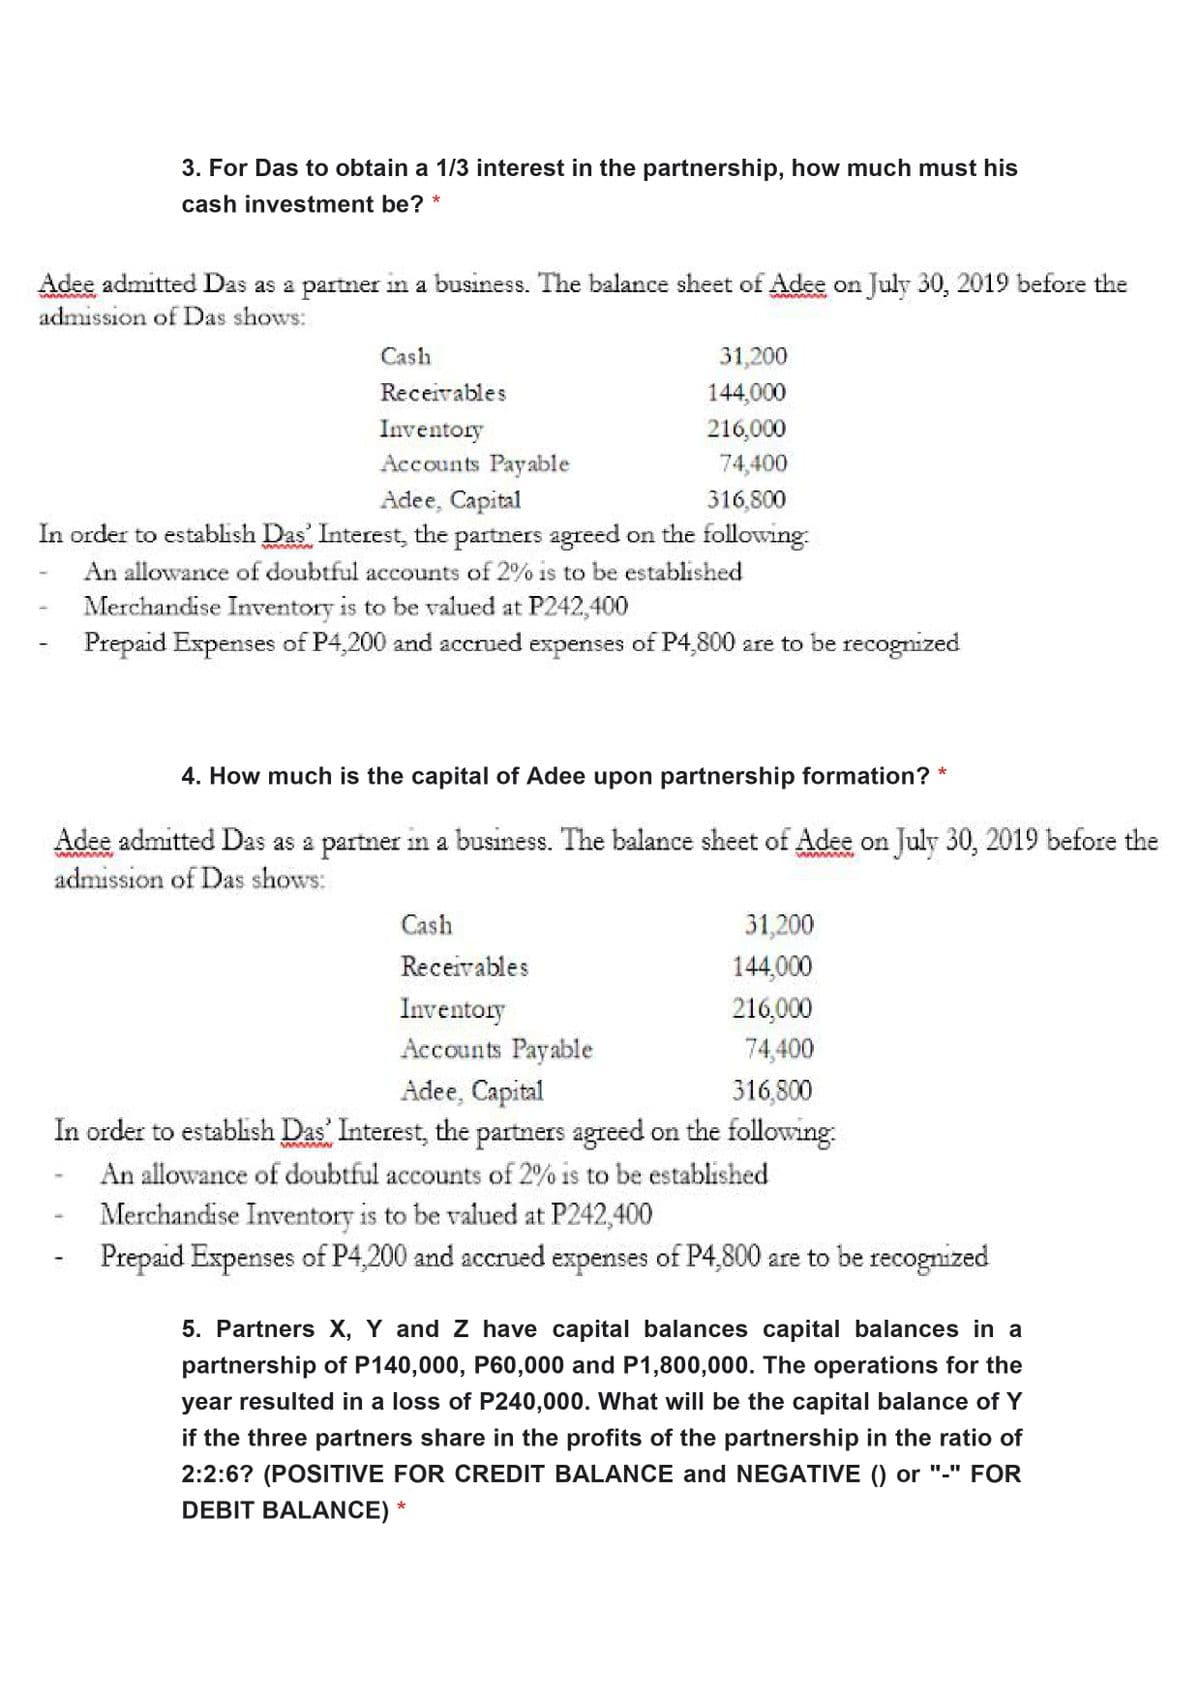 3. For Das to obtain a 1/3 interest in the partnership, how much must his
cash investment be?
Adee admitted Das as a partner in a business. The balance sheet of Adee on July 30, 2019 before the
admission of Das shows:
Cash
31,200
Receivables
144,000
Inventory
216,000
Accounts Payable
74,400
Adee, Capital
In order to establish Das Interest, the partners agreed on the following
316,800
An allowance of doubtful accounts of 2% is to be established
Merchandise Inventory is to be valued at P242,400
Prepaid Expenses of P4,200 and accrued expenses of P4,800 are to be recognized
4. How much is the capital of Adee upon partnership formation?
Adee admitted Das as a partner in a business. The balance sheet of Adee on July 30, 2019 before the
admission of Das shows:
Cash
31,200
Receivables
144,000
Inventory
216,000
Accounts Payable
74,400
Adee, Capital
In order to establish Das Interest, the partners agreed on the following
316,800
An allowance of doubtful accounts of 2% is to be established
Merchandise Inventory is to be valued at P242,400
Prepaid Expenses of P4,200 and accrued expenses of P4,800 are to be recognized
5. Partners X, Y and Z have capital balances capital balances in a
partnership of P140,000, P60,000 and P1,800,000. The operations for the
year resulted in a loss of P240,000. What will be the capital balance of Y
if the three partners share in the profits of the partnership in the ratio of
2:2:6? (POSITIVE FOR CREDIT BALANCE and NEGATIVE () or "-" FOR
DEBIT BALANCE) *
